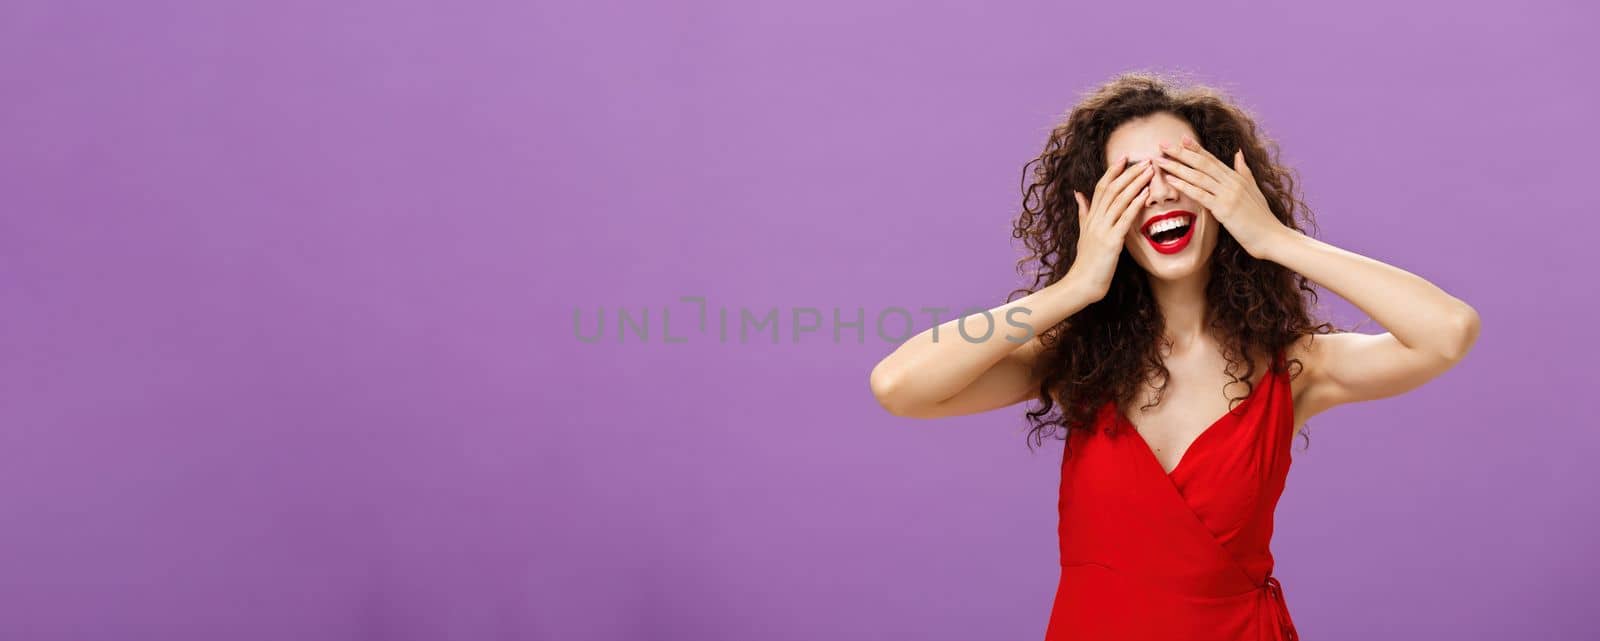 Wife waiting for husband present gift for anniversary closing eyes with palms and smiling broadly peeking through fingers being charmed and excited standing in seductive red dress over purple wall. Emotions concept